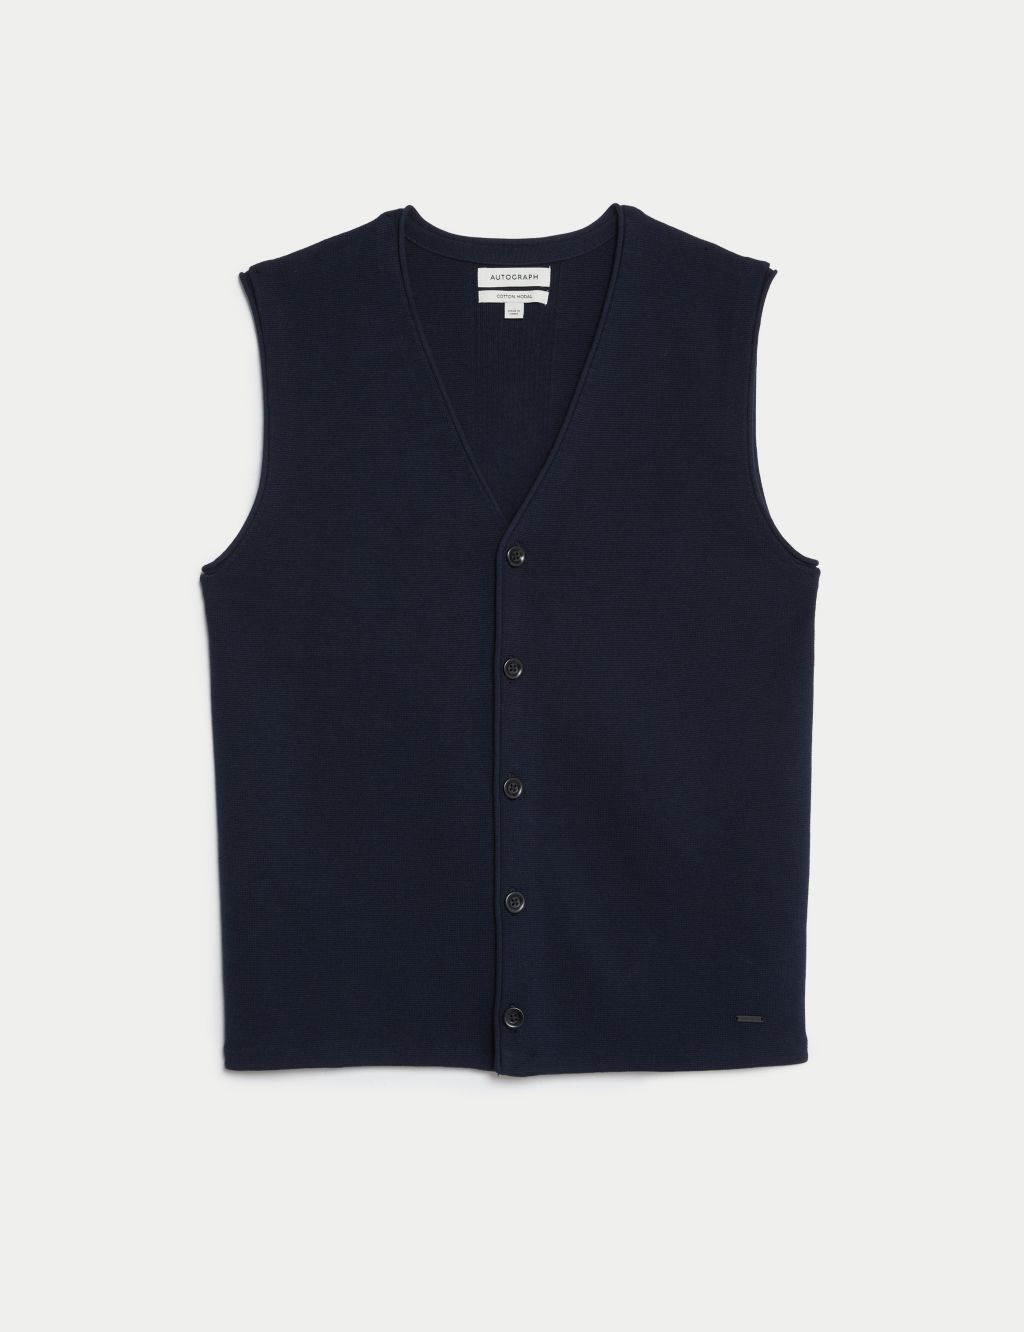 Cotton Blend Knitted Waistcoat image 1